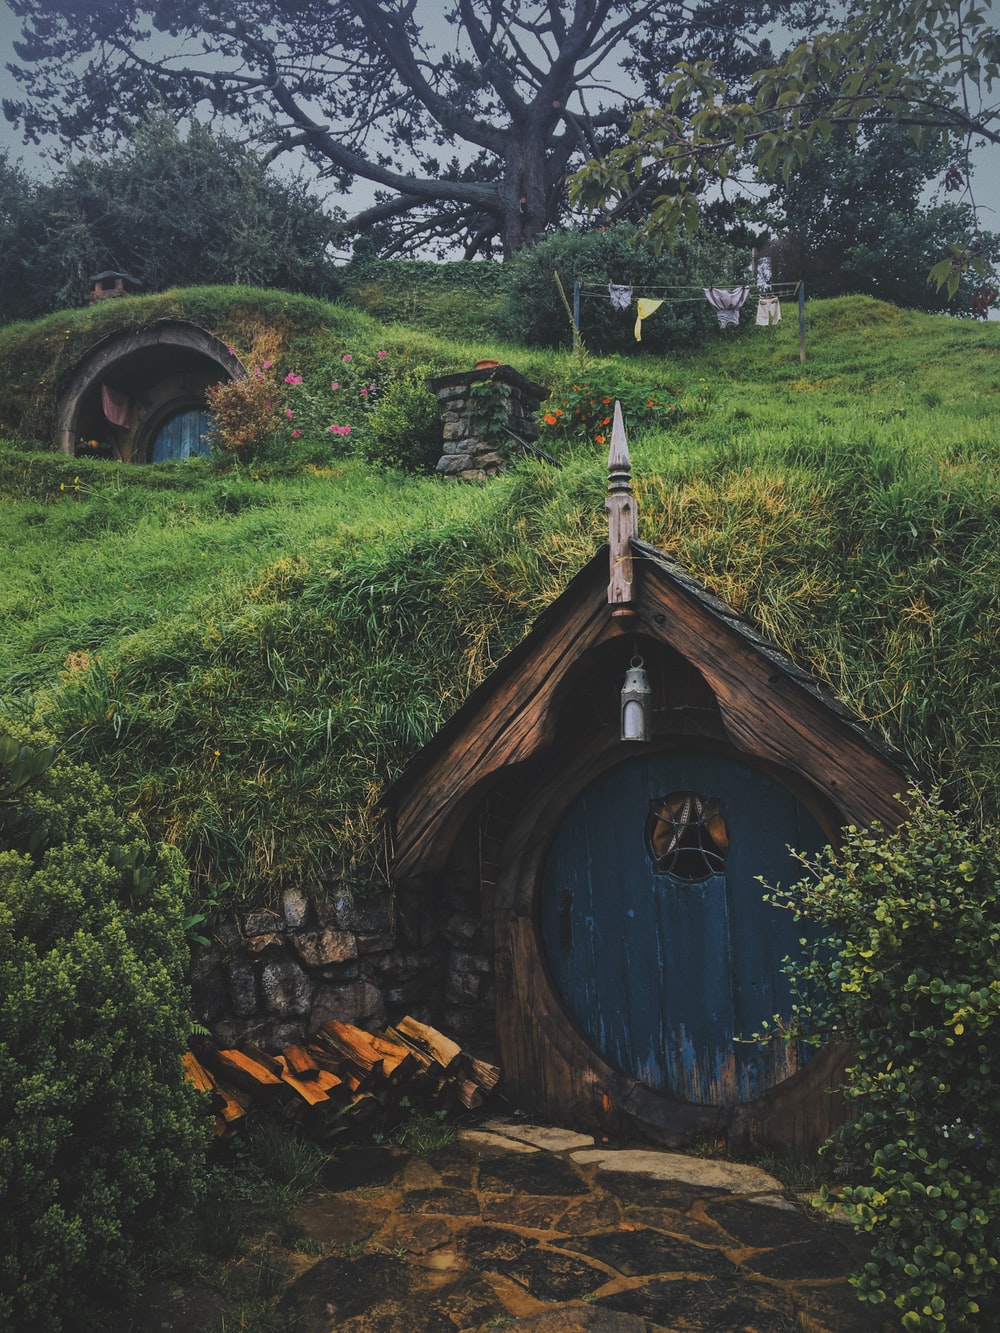 Hobbit House Picture. Download Free Image